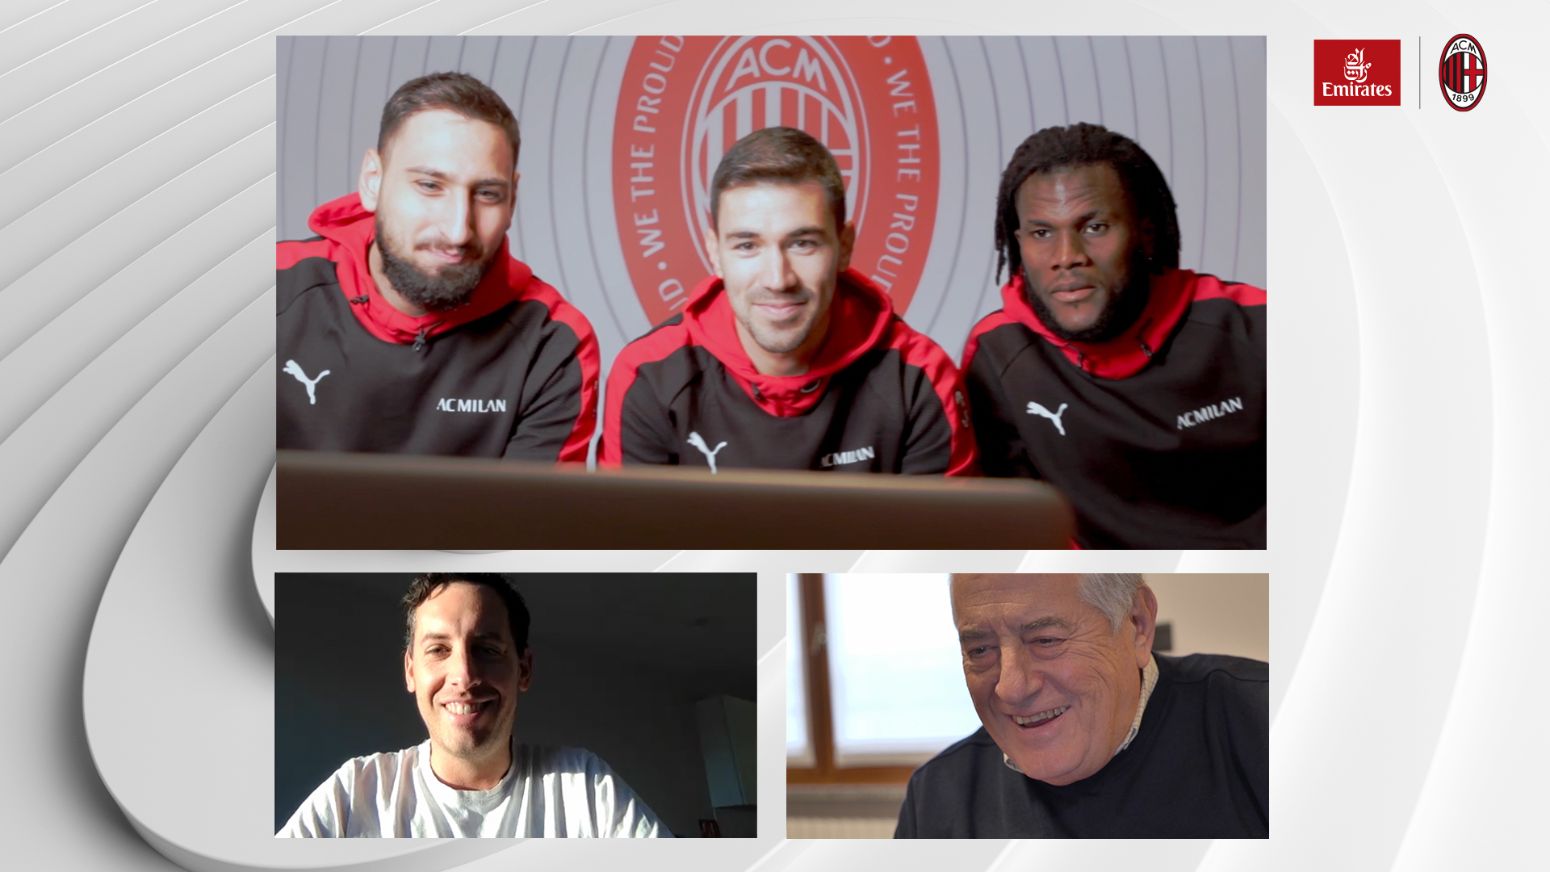 Latest 2020 video call: Emirates Airlines dazzles fans around the world with the help of AC Milan, Arsenal and Real Madrid